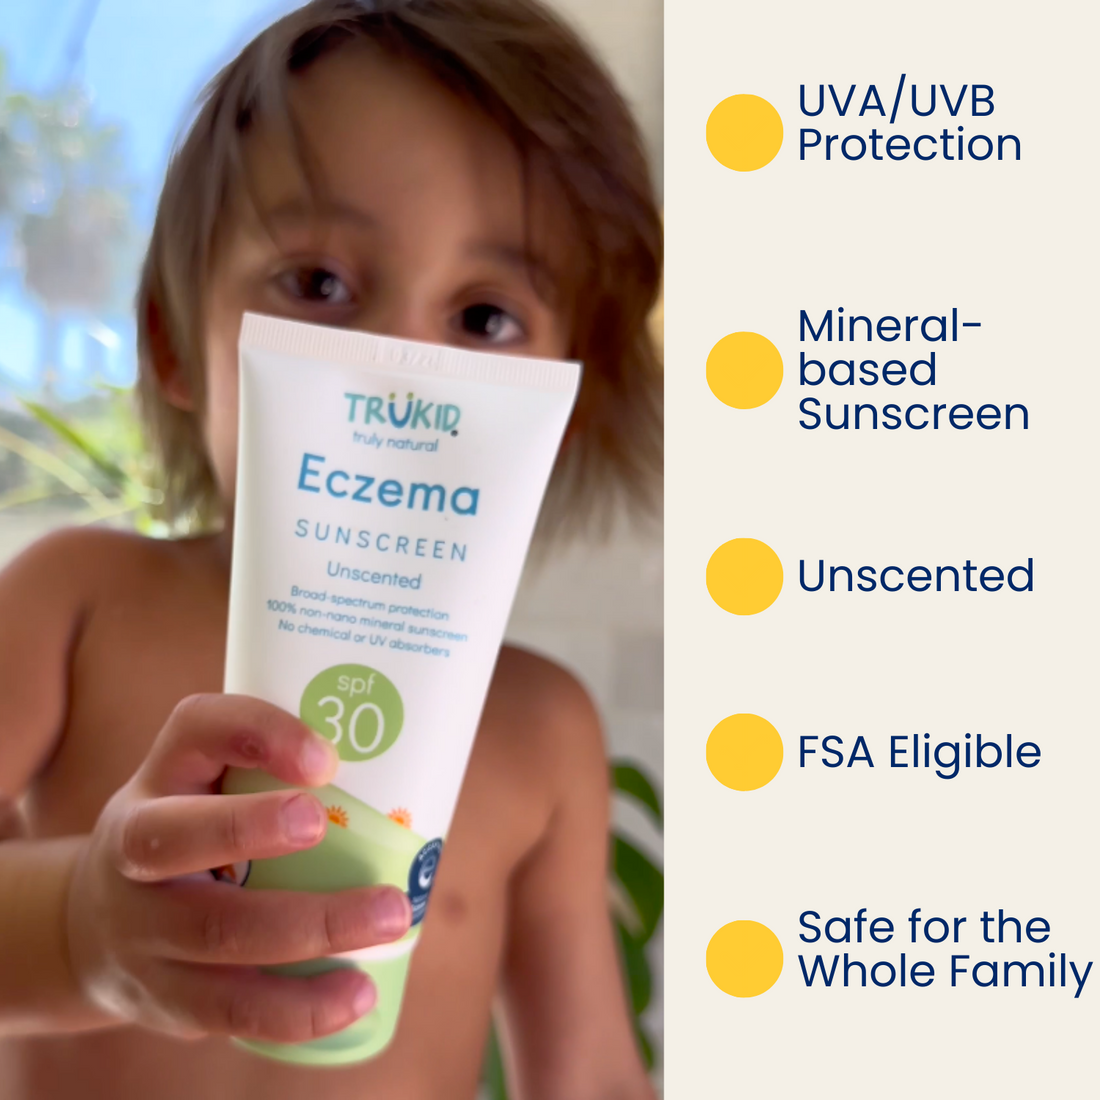 TruKid Eczema (Unscented) Daily SPF30 Sunscreen Features